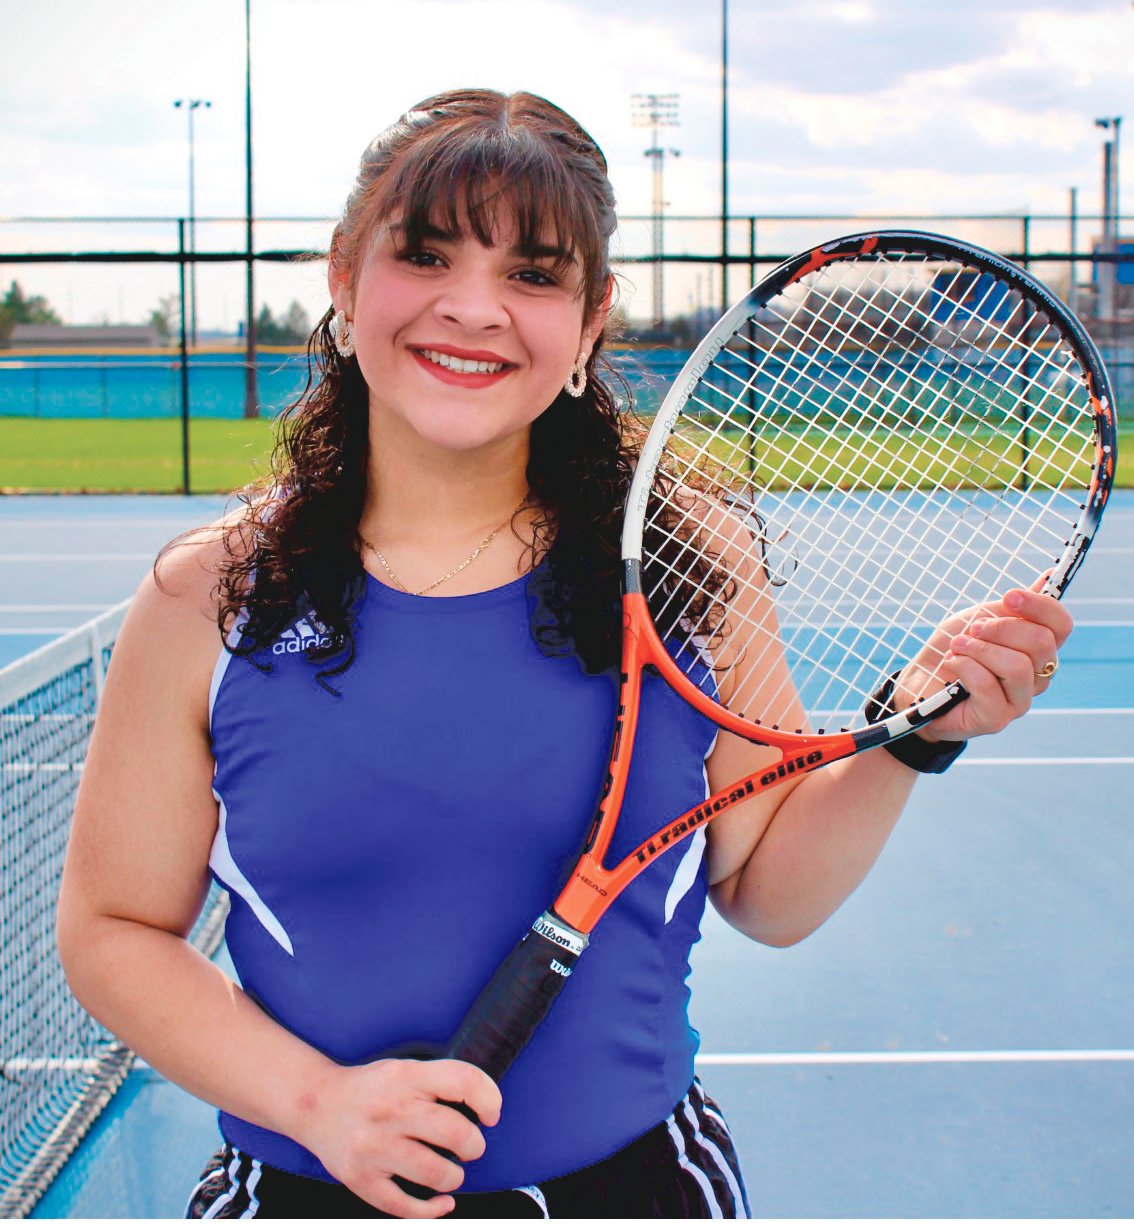 Crawfordsville's Tamara Riano was looking forward to her senior year of tennis.  She is the daughter of Alfonso and Rossana Riano.  She is headed off to Bloomington to attend IU, major in Nursing, and minor in Psychology.